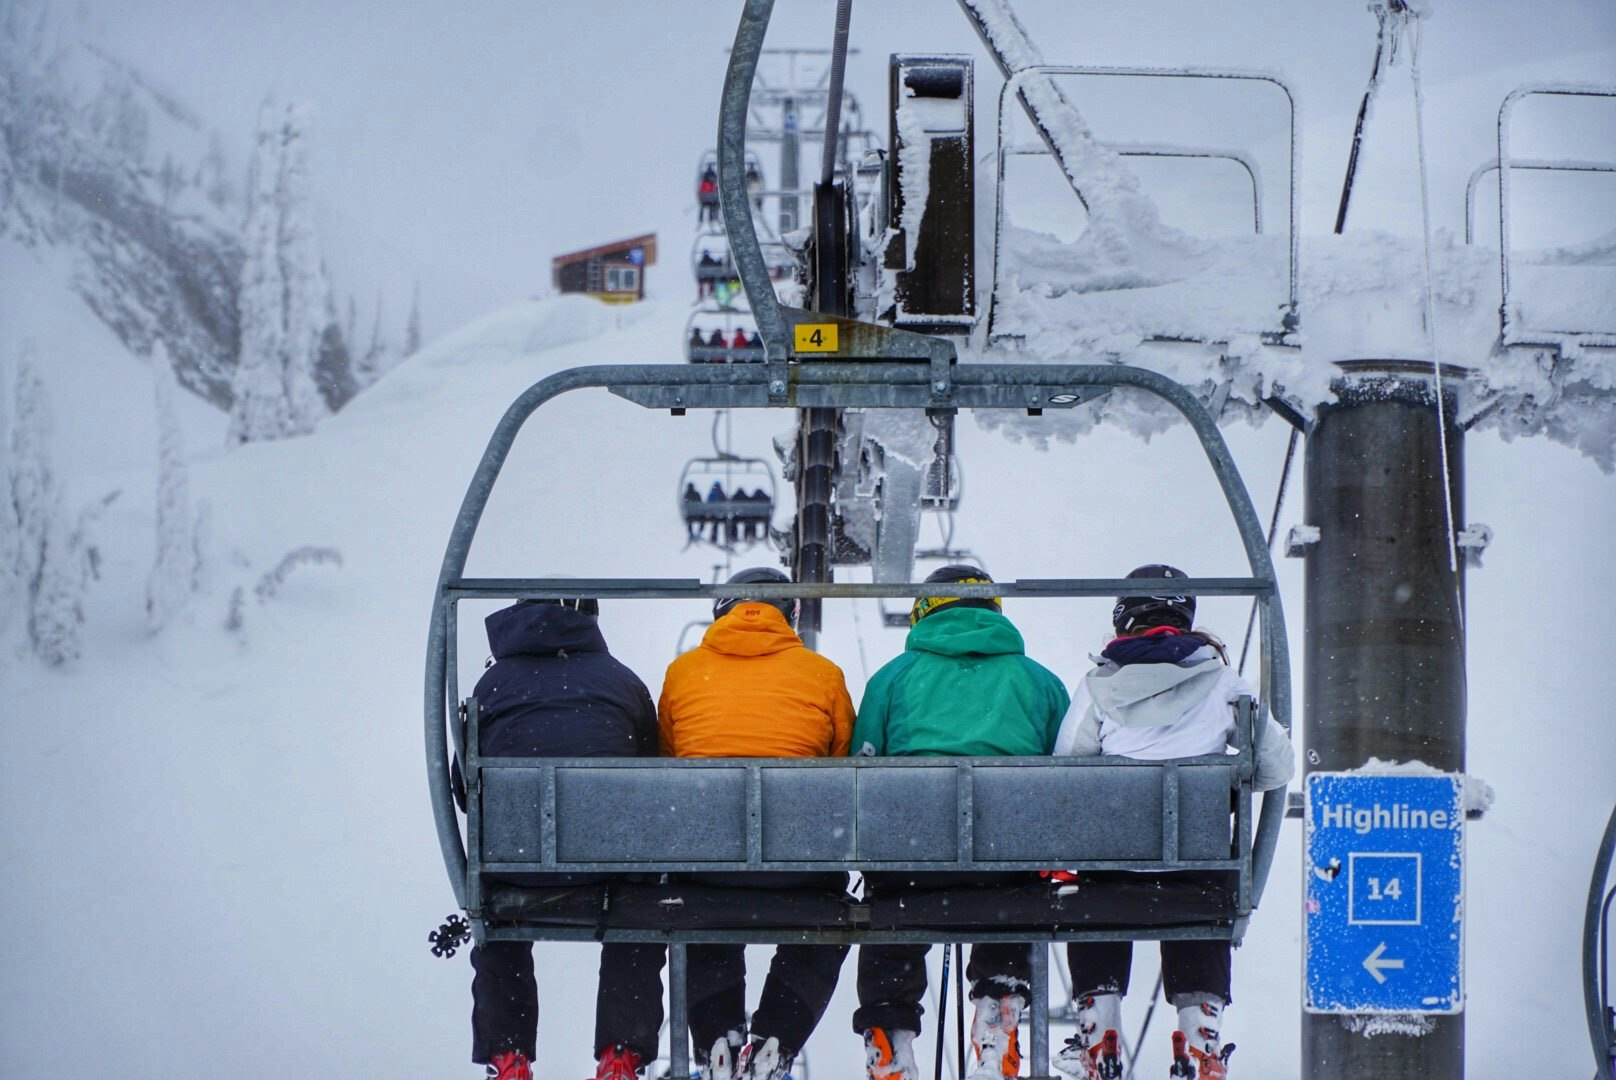 Four people in ski jackets of different colors are on a chair lift, ascending a mountain. Their backs are to the camera and it's snowing lightly.